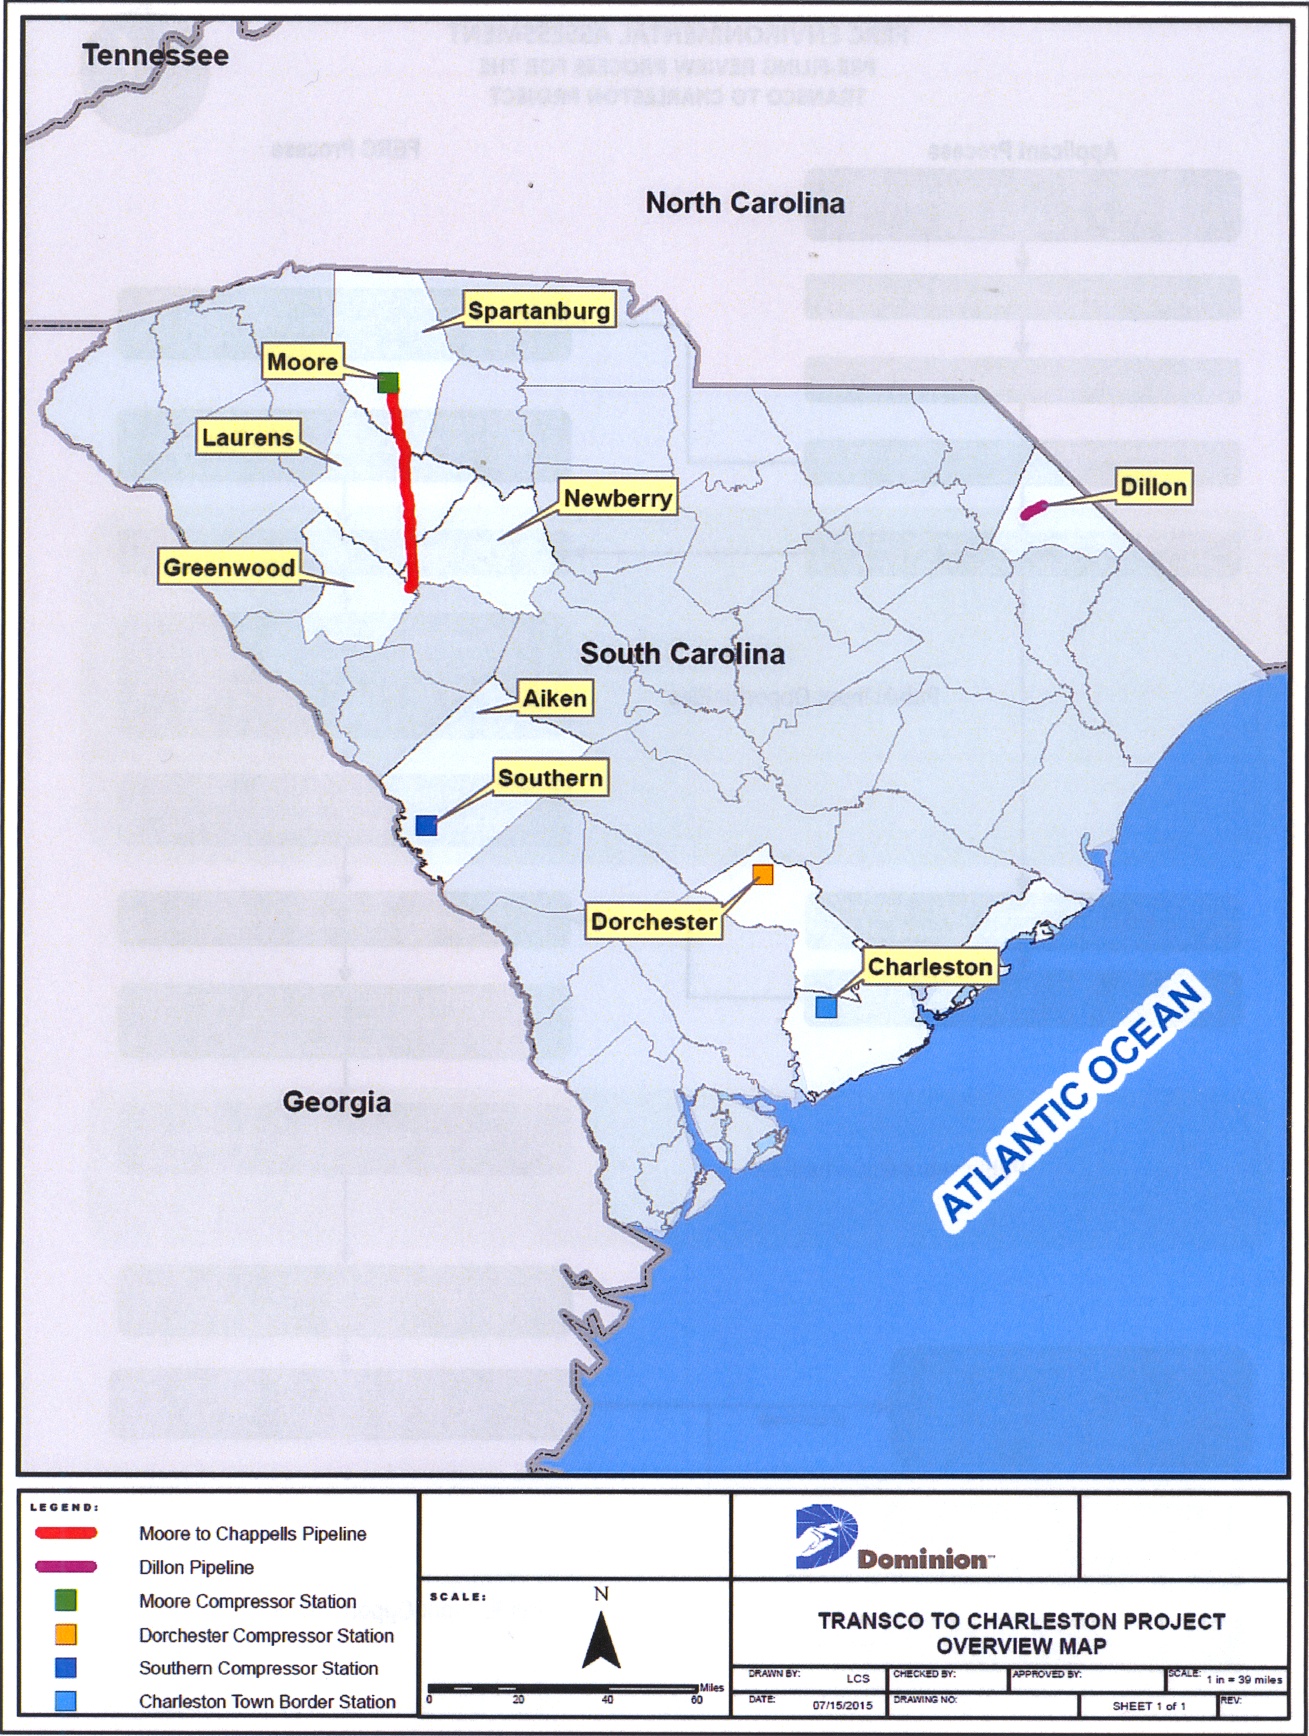 public-open-house-held-on-dominion-s-transco-to-charleston-project